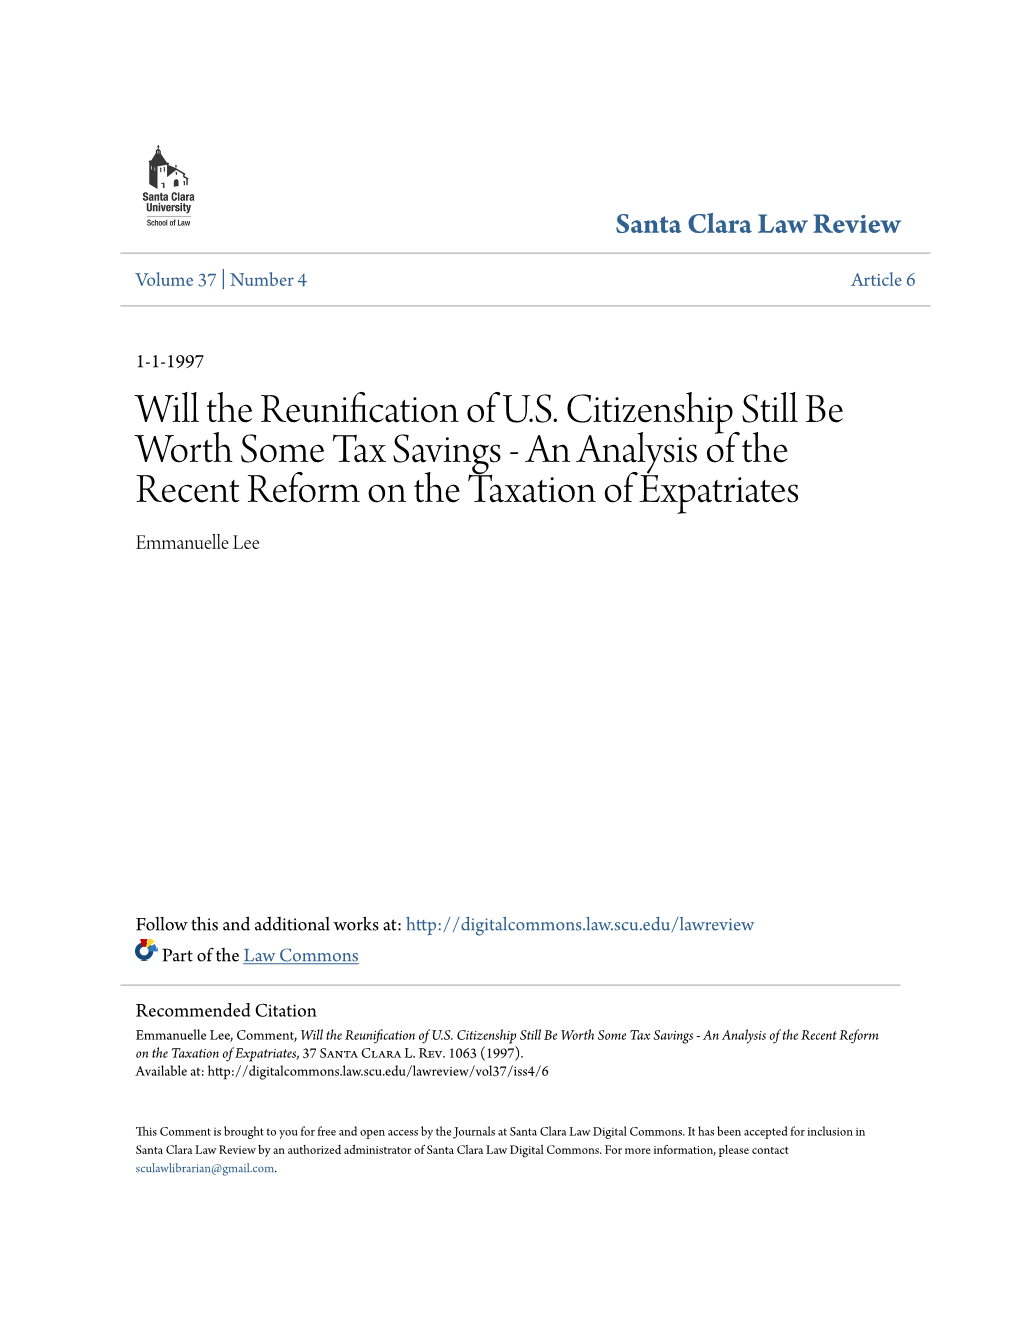 Will the Reunification of U.S. Citizenship Still Be Worth Some Tax Savings - an Analysis of the Recent Reform on the Taxation of Expatriates Emmanuelle Lee